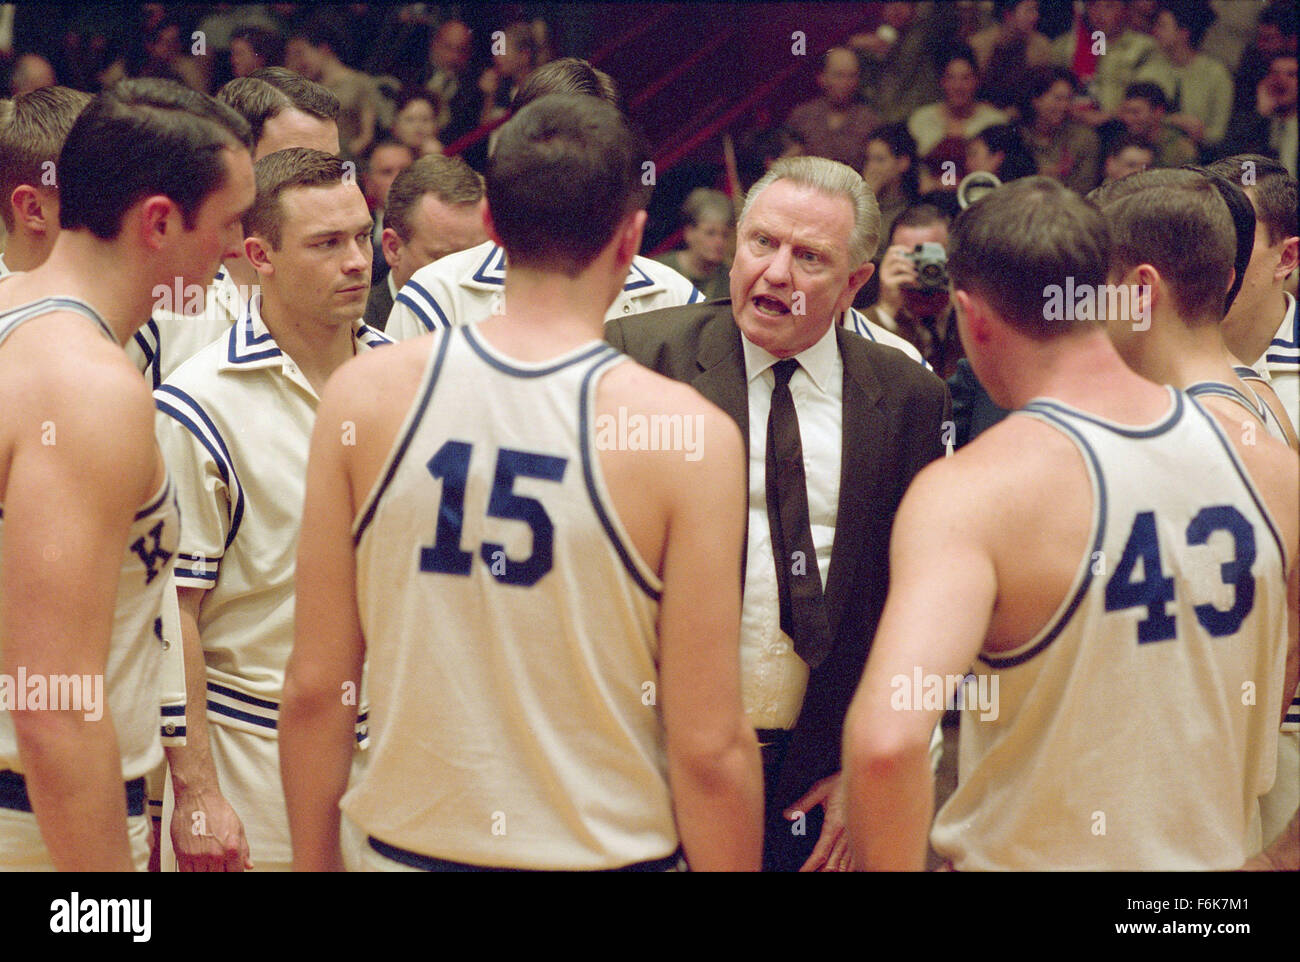 RELEASE DATE: Jan 11, 2006;STUDIO: Walt Disney Pictures. PLOT: In 1966, Texas Western coach Don Haskins led the first all-black starting line-up for a college basketball team to the NCAA national championship. PICTURED:     JON VOIGHT  as Coach Adolph Rupp. Stock Photo